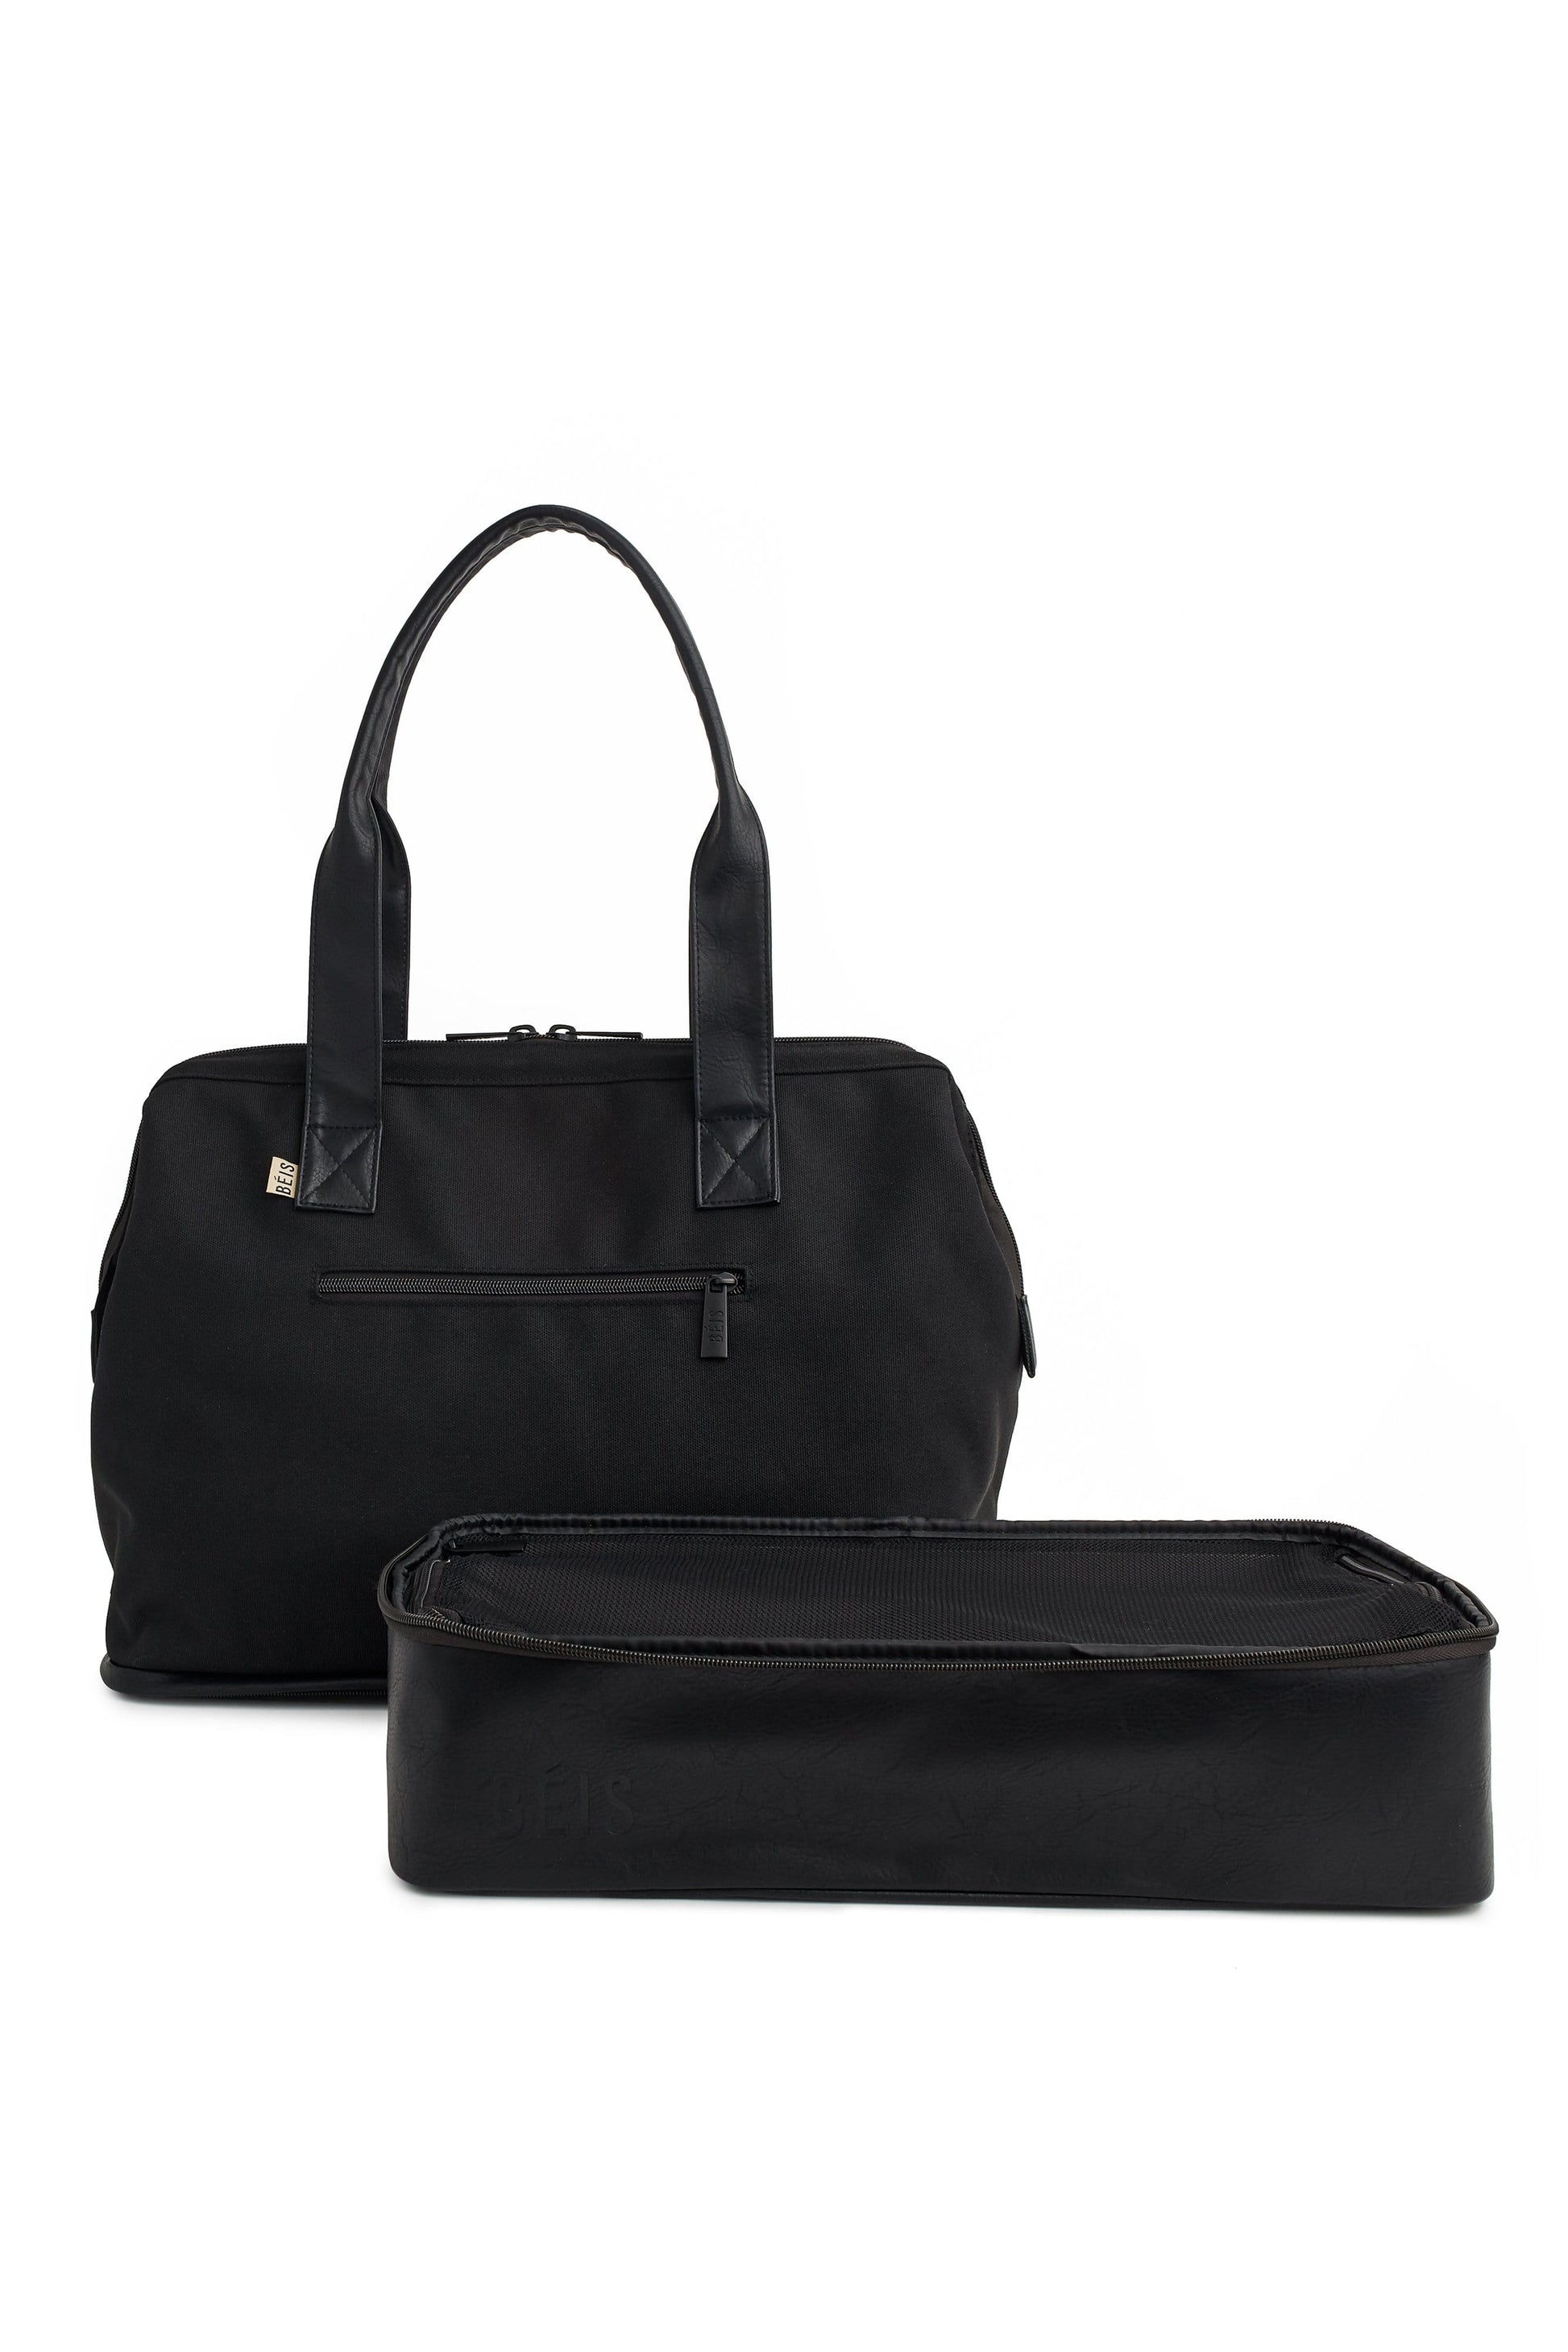 Convertible Mini Weekender Black Front Removable Bottom Compartment